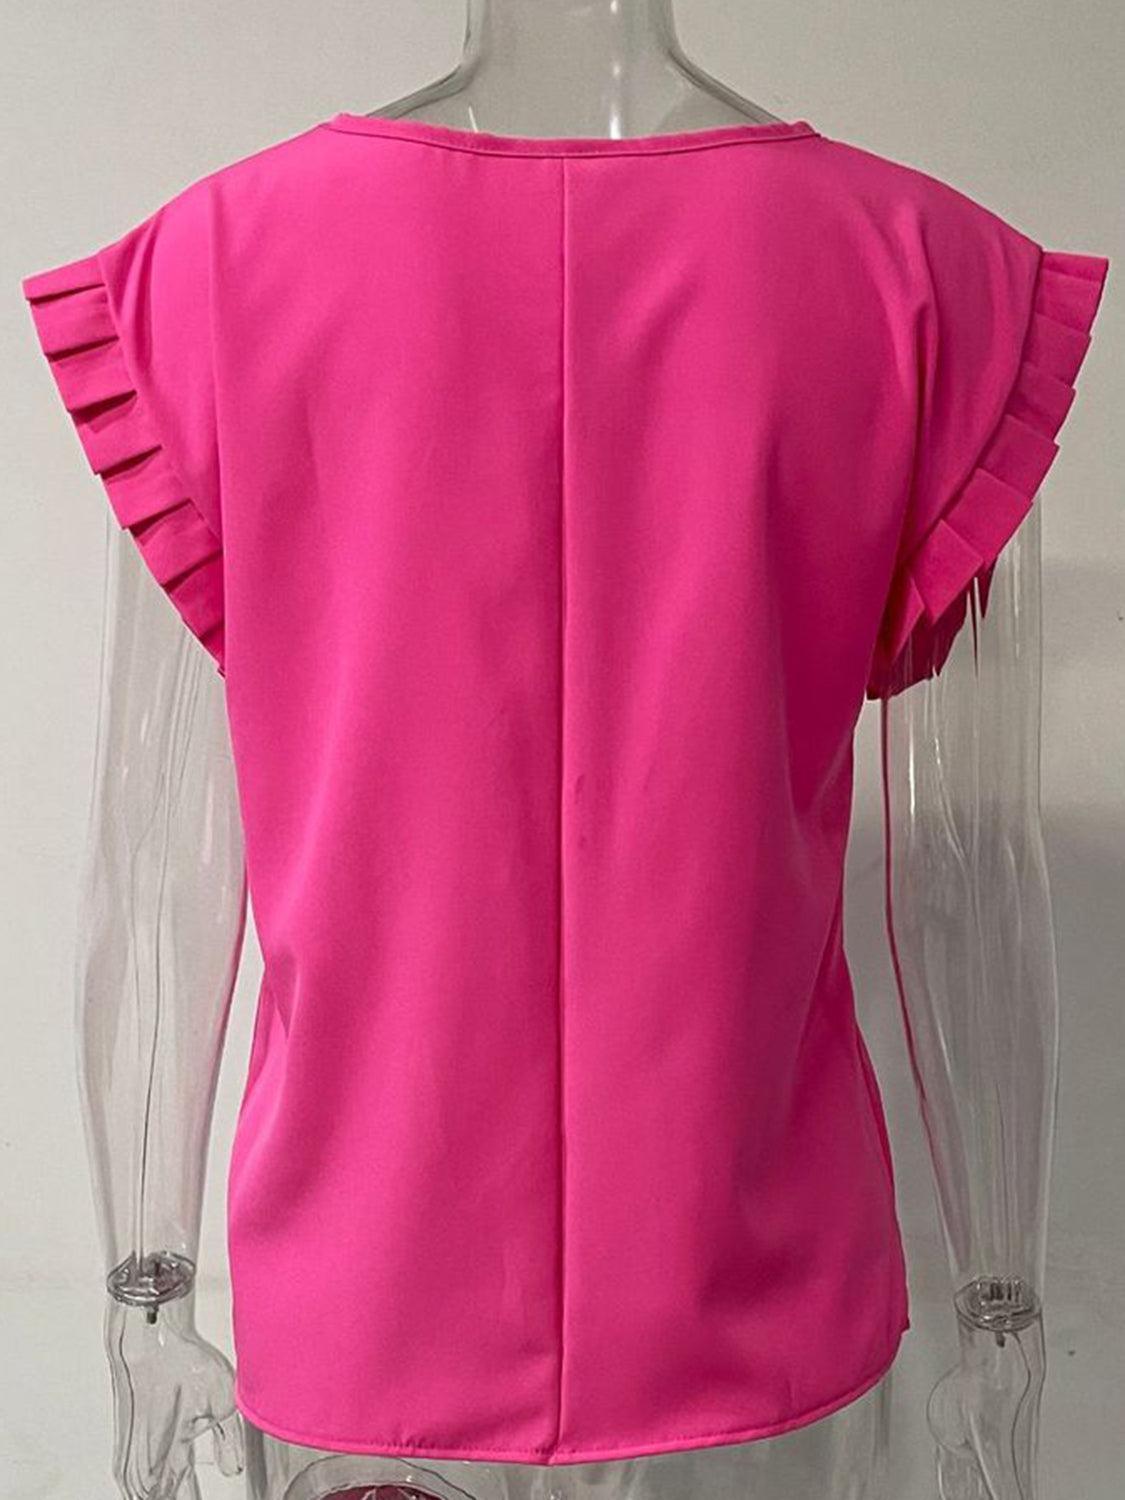 a mannequin wearing a pink top with ruffles